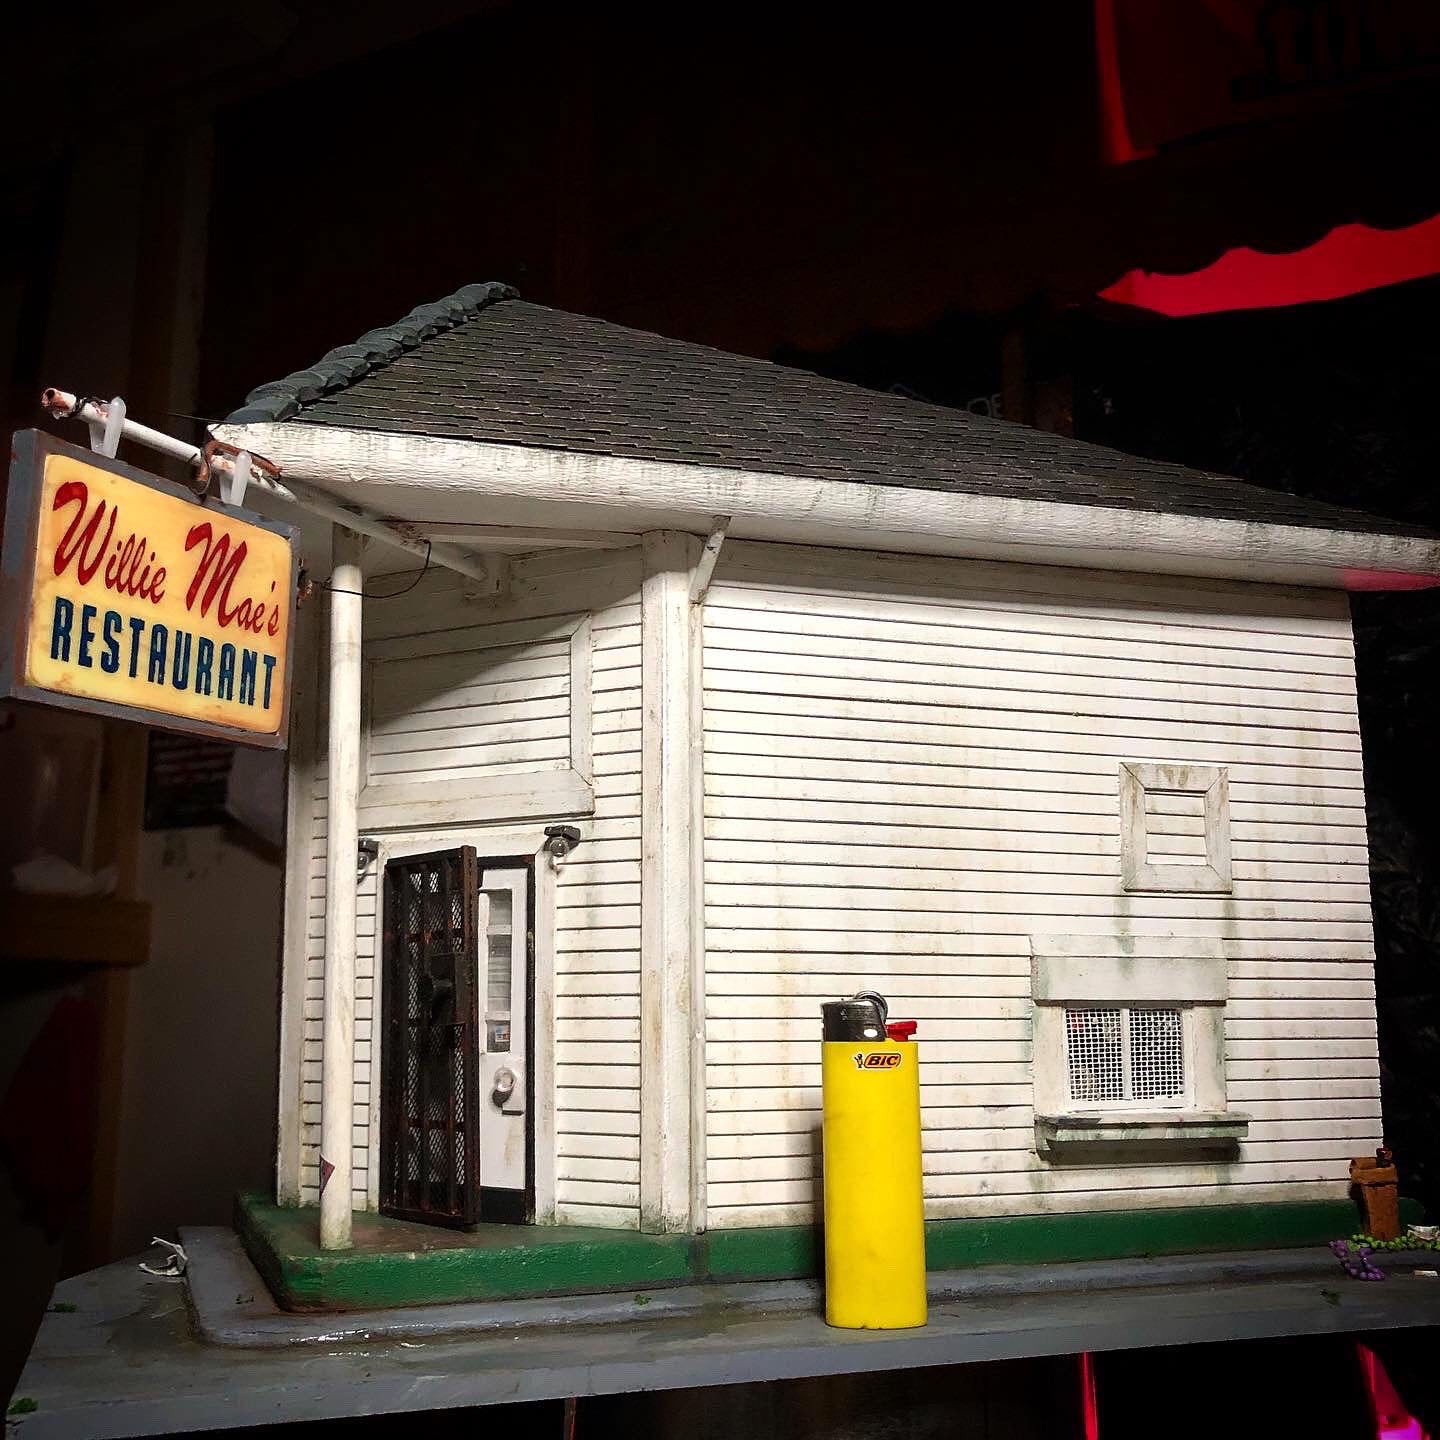 Photo showing the entire Willie Mae's Restaurant Miniature model from the front right view, there is a yellow bic lighter for scale which is about one fifth of the height of the model. 